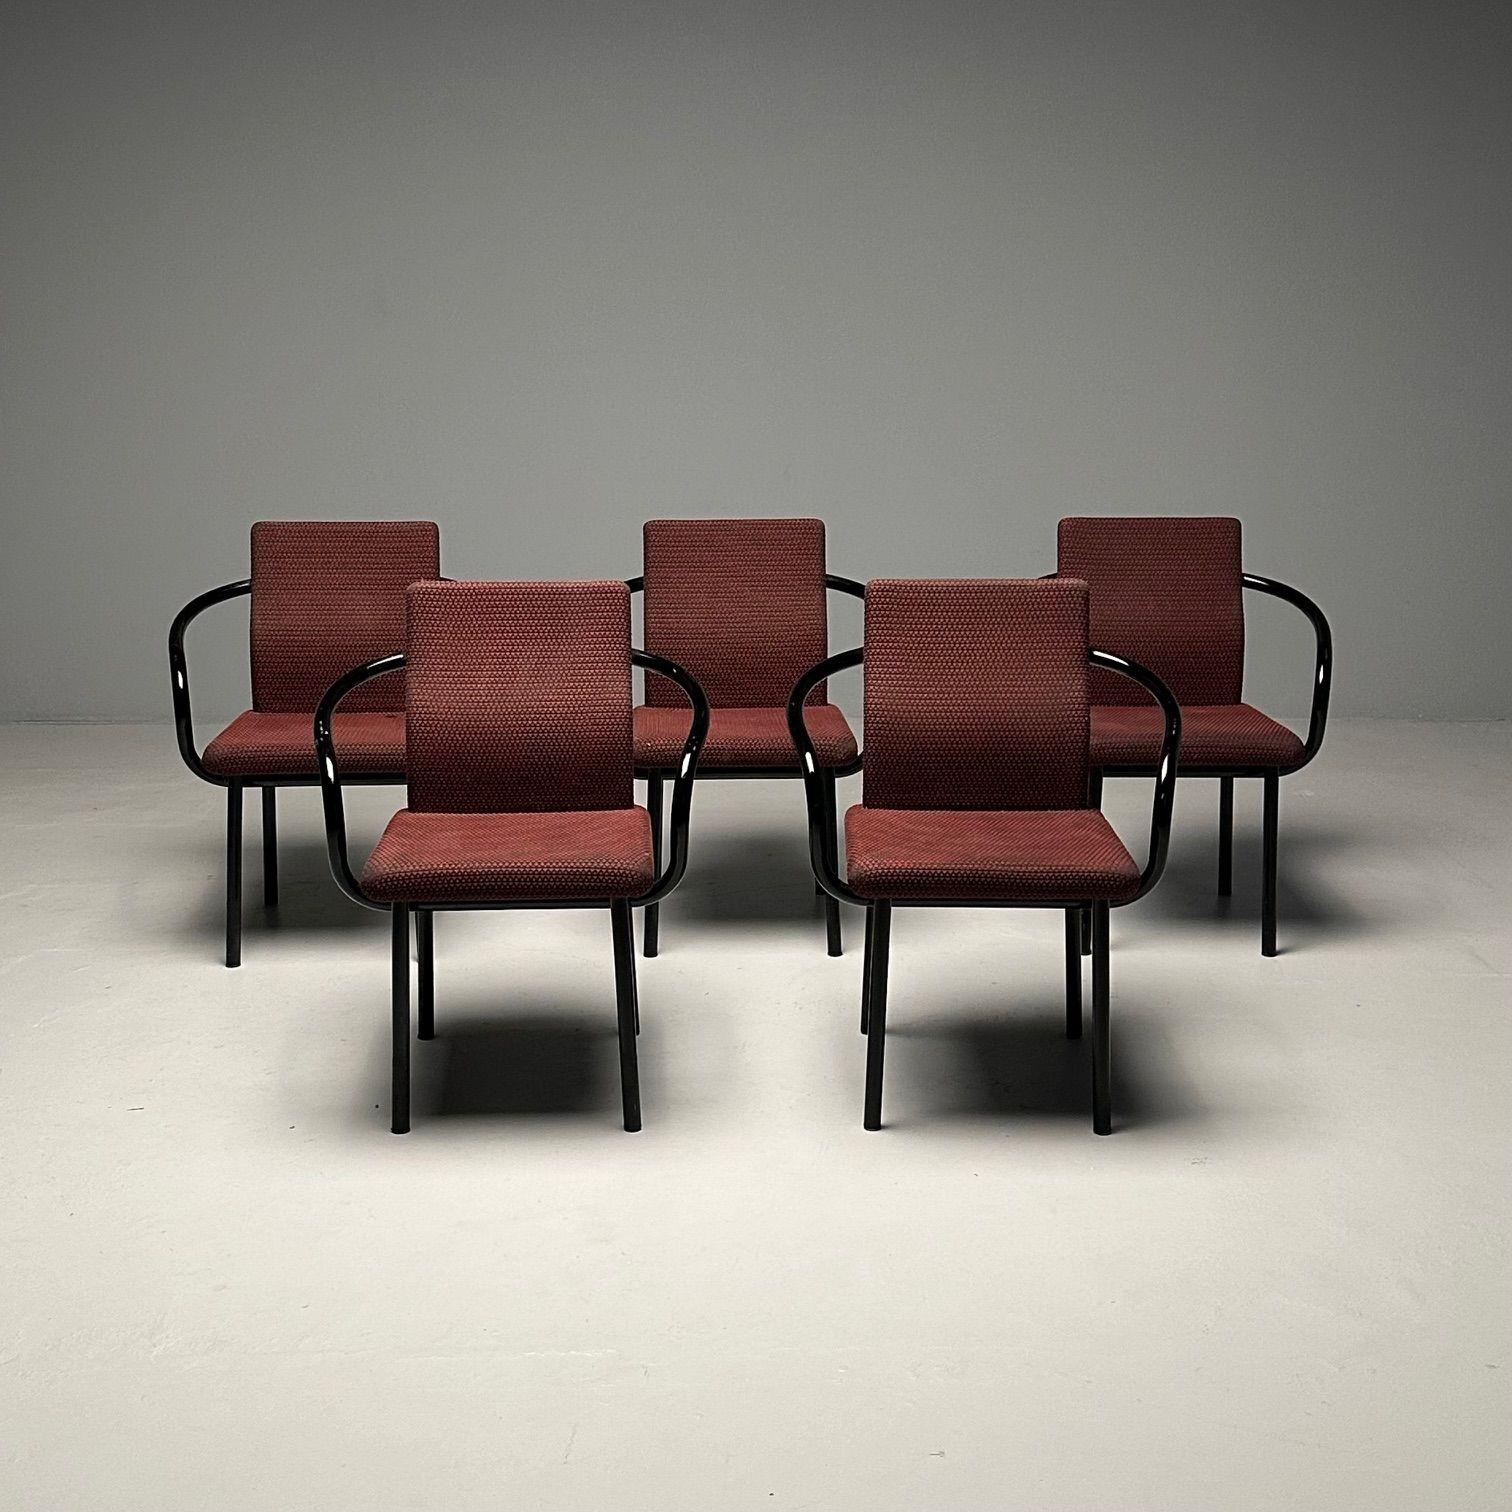 Ettore Sottsass, Knoll, Mid-Century Modern, Mandarin Armchairs, Italy, 1990s

Set of five mid-century modern arm chairs designed by Ettore Sottsass for Knoll in Italy, 1986. Featuring armrests that are made of a single piece of wood that stretches